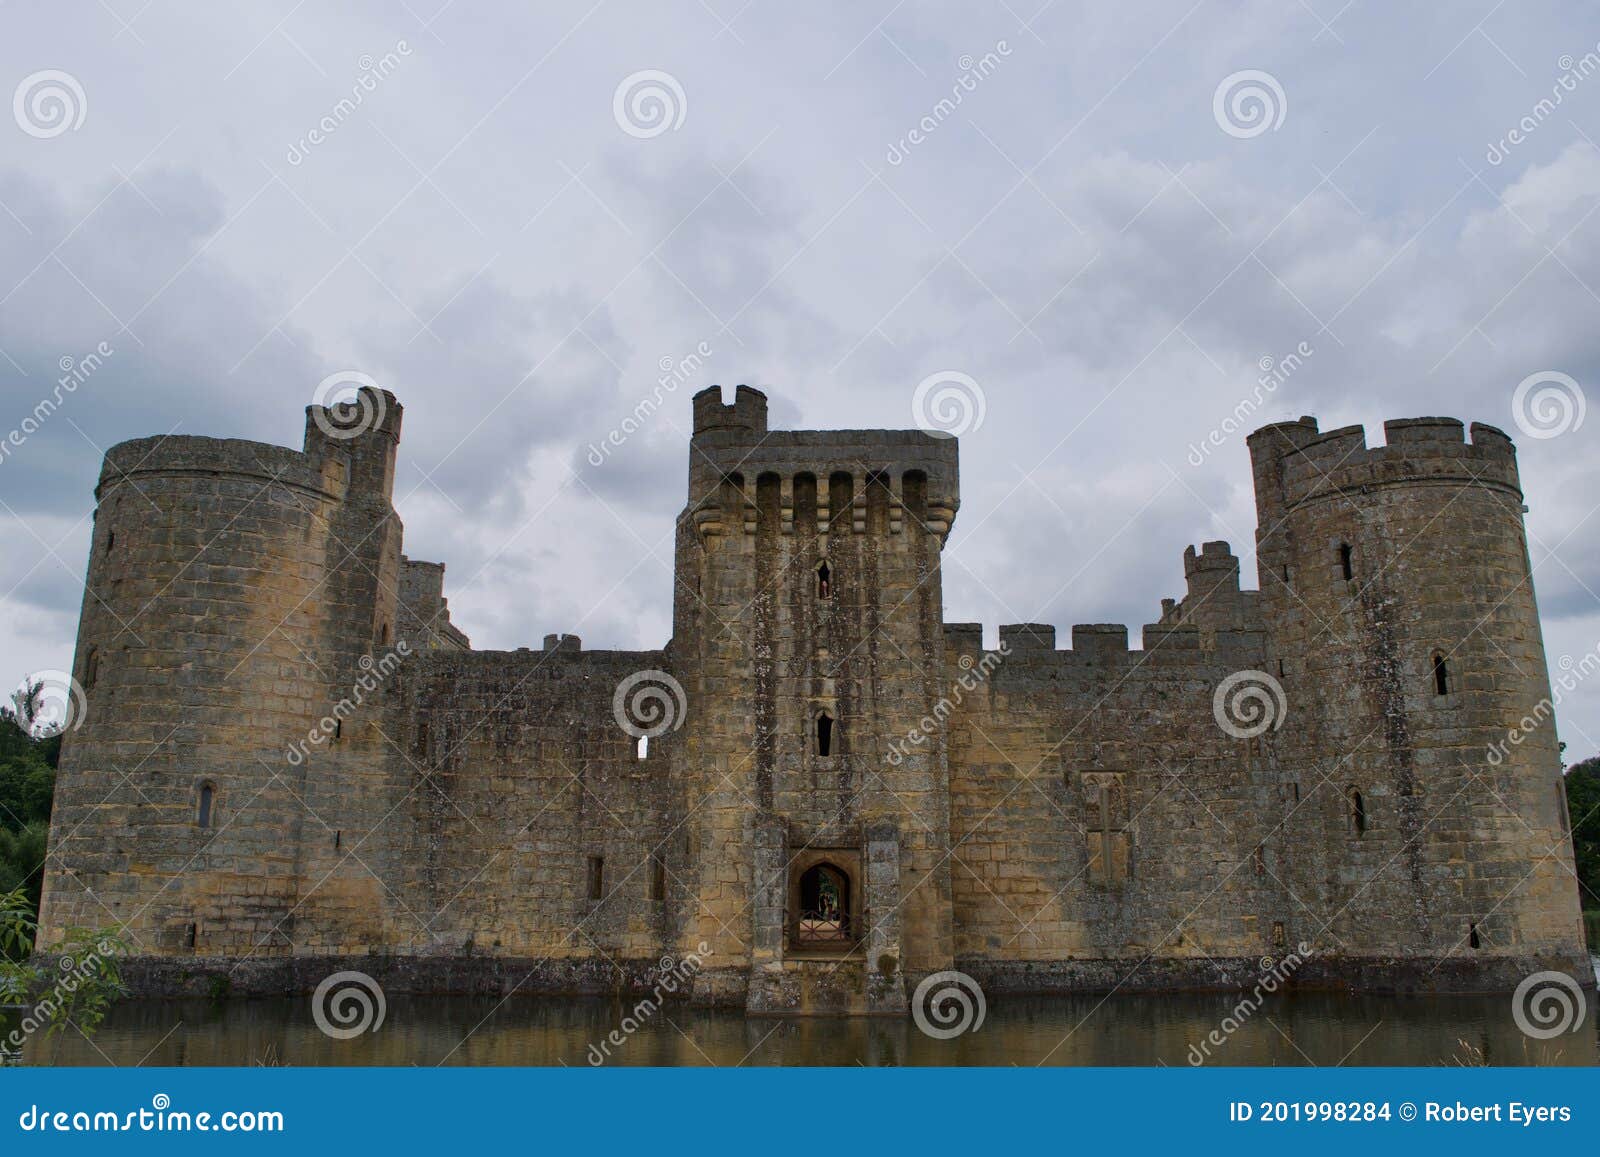 Ruined Medieval Castle with a Moat Bodiam Castle, UK Stock Photo